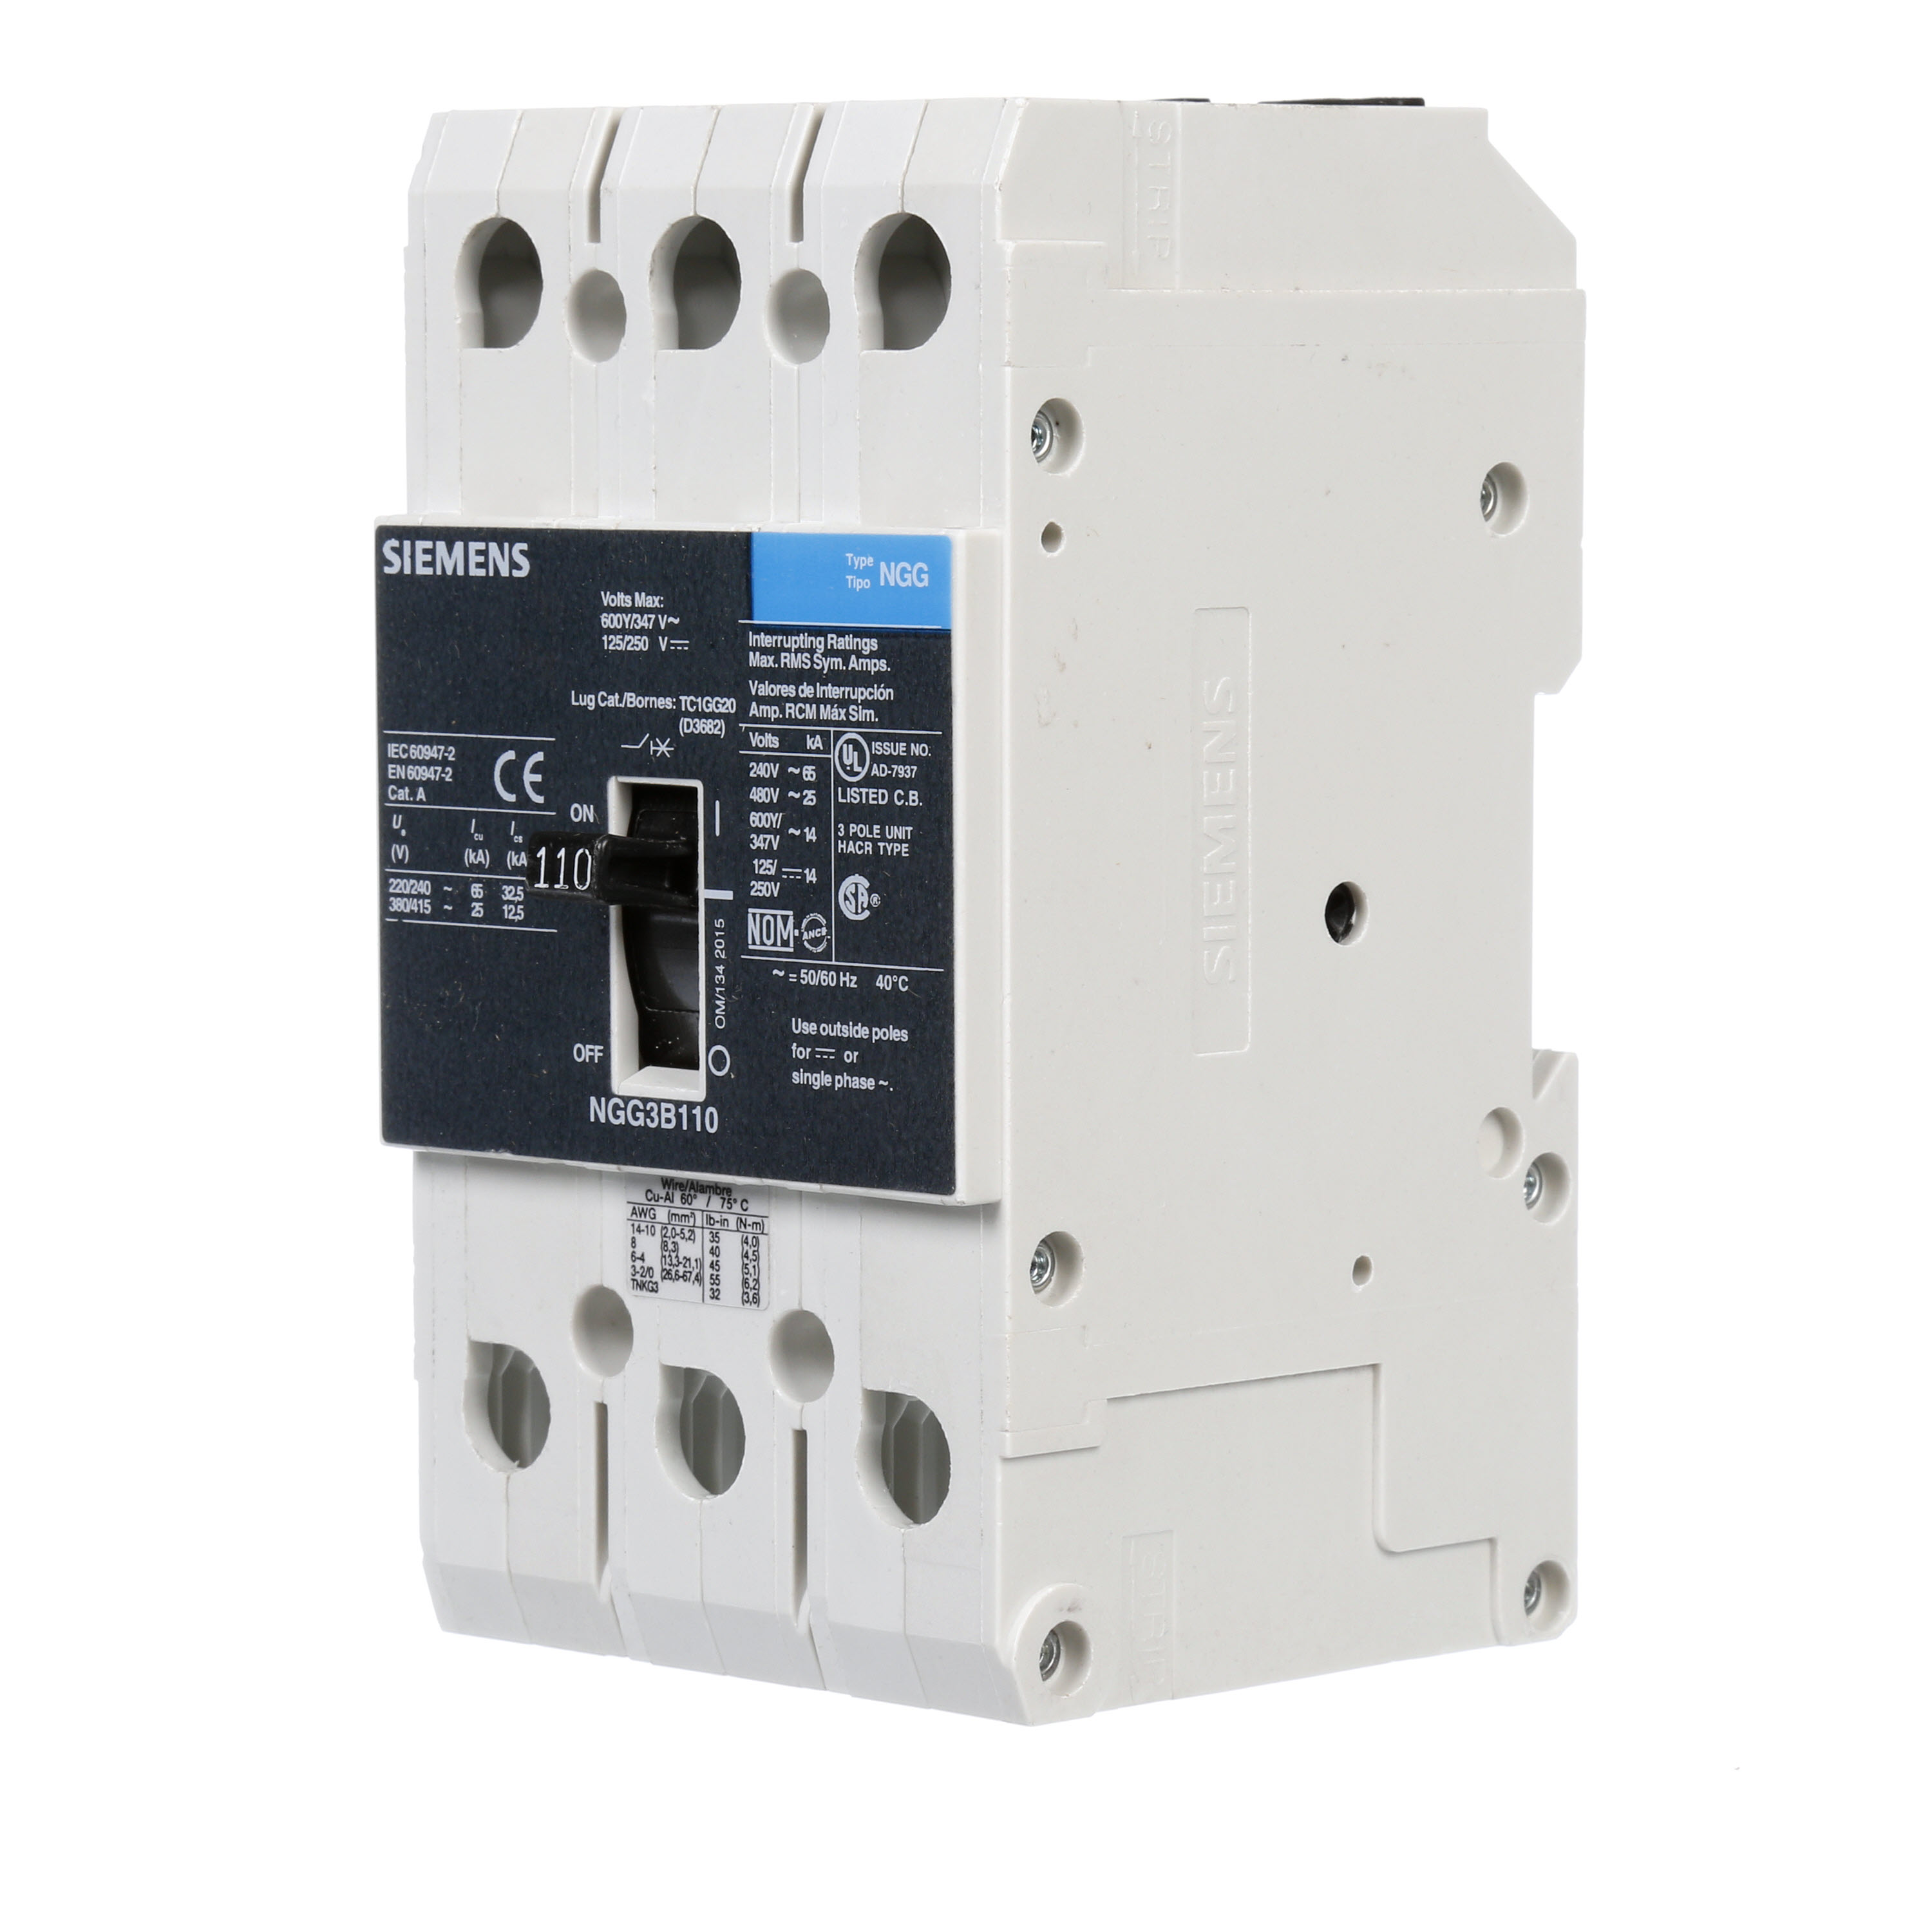 SIEMENS LOW VOLTAGE G FRAME CIRCUIT BREAKER WITH THERMAL - MAGNETIC TRIP. UL LISTED NGG FRAME WITH STANDARD BREAKING CAPACITY. 110A 3-POLE (14KAIC AT 600Y/347V) (25KAIC AT 480V). SPECIAL FEATURES MOUNTS ON DIN RAIL / SCREW, LINE AND LOAD SIDE LUGS (TC1GG20) WIRE RANGE 8 - 1/0 AWS (CU/AL). DIMENSIONS (W x H x D) IN 3 x5.4 x 2.8.